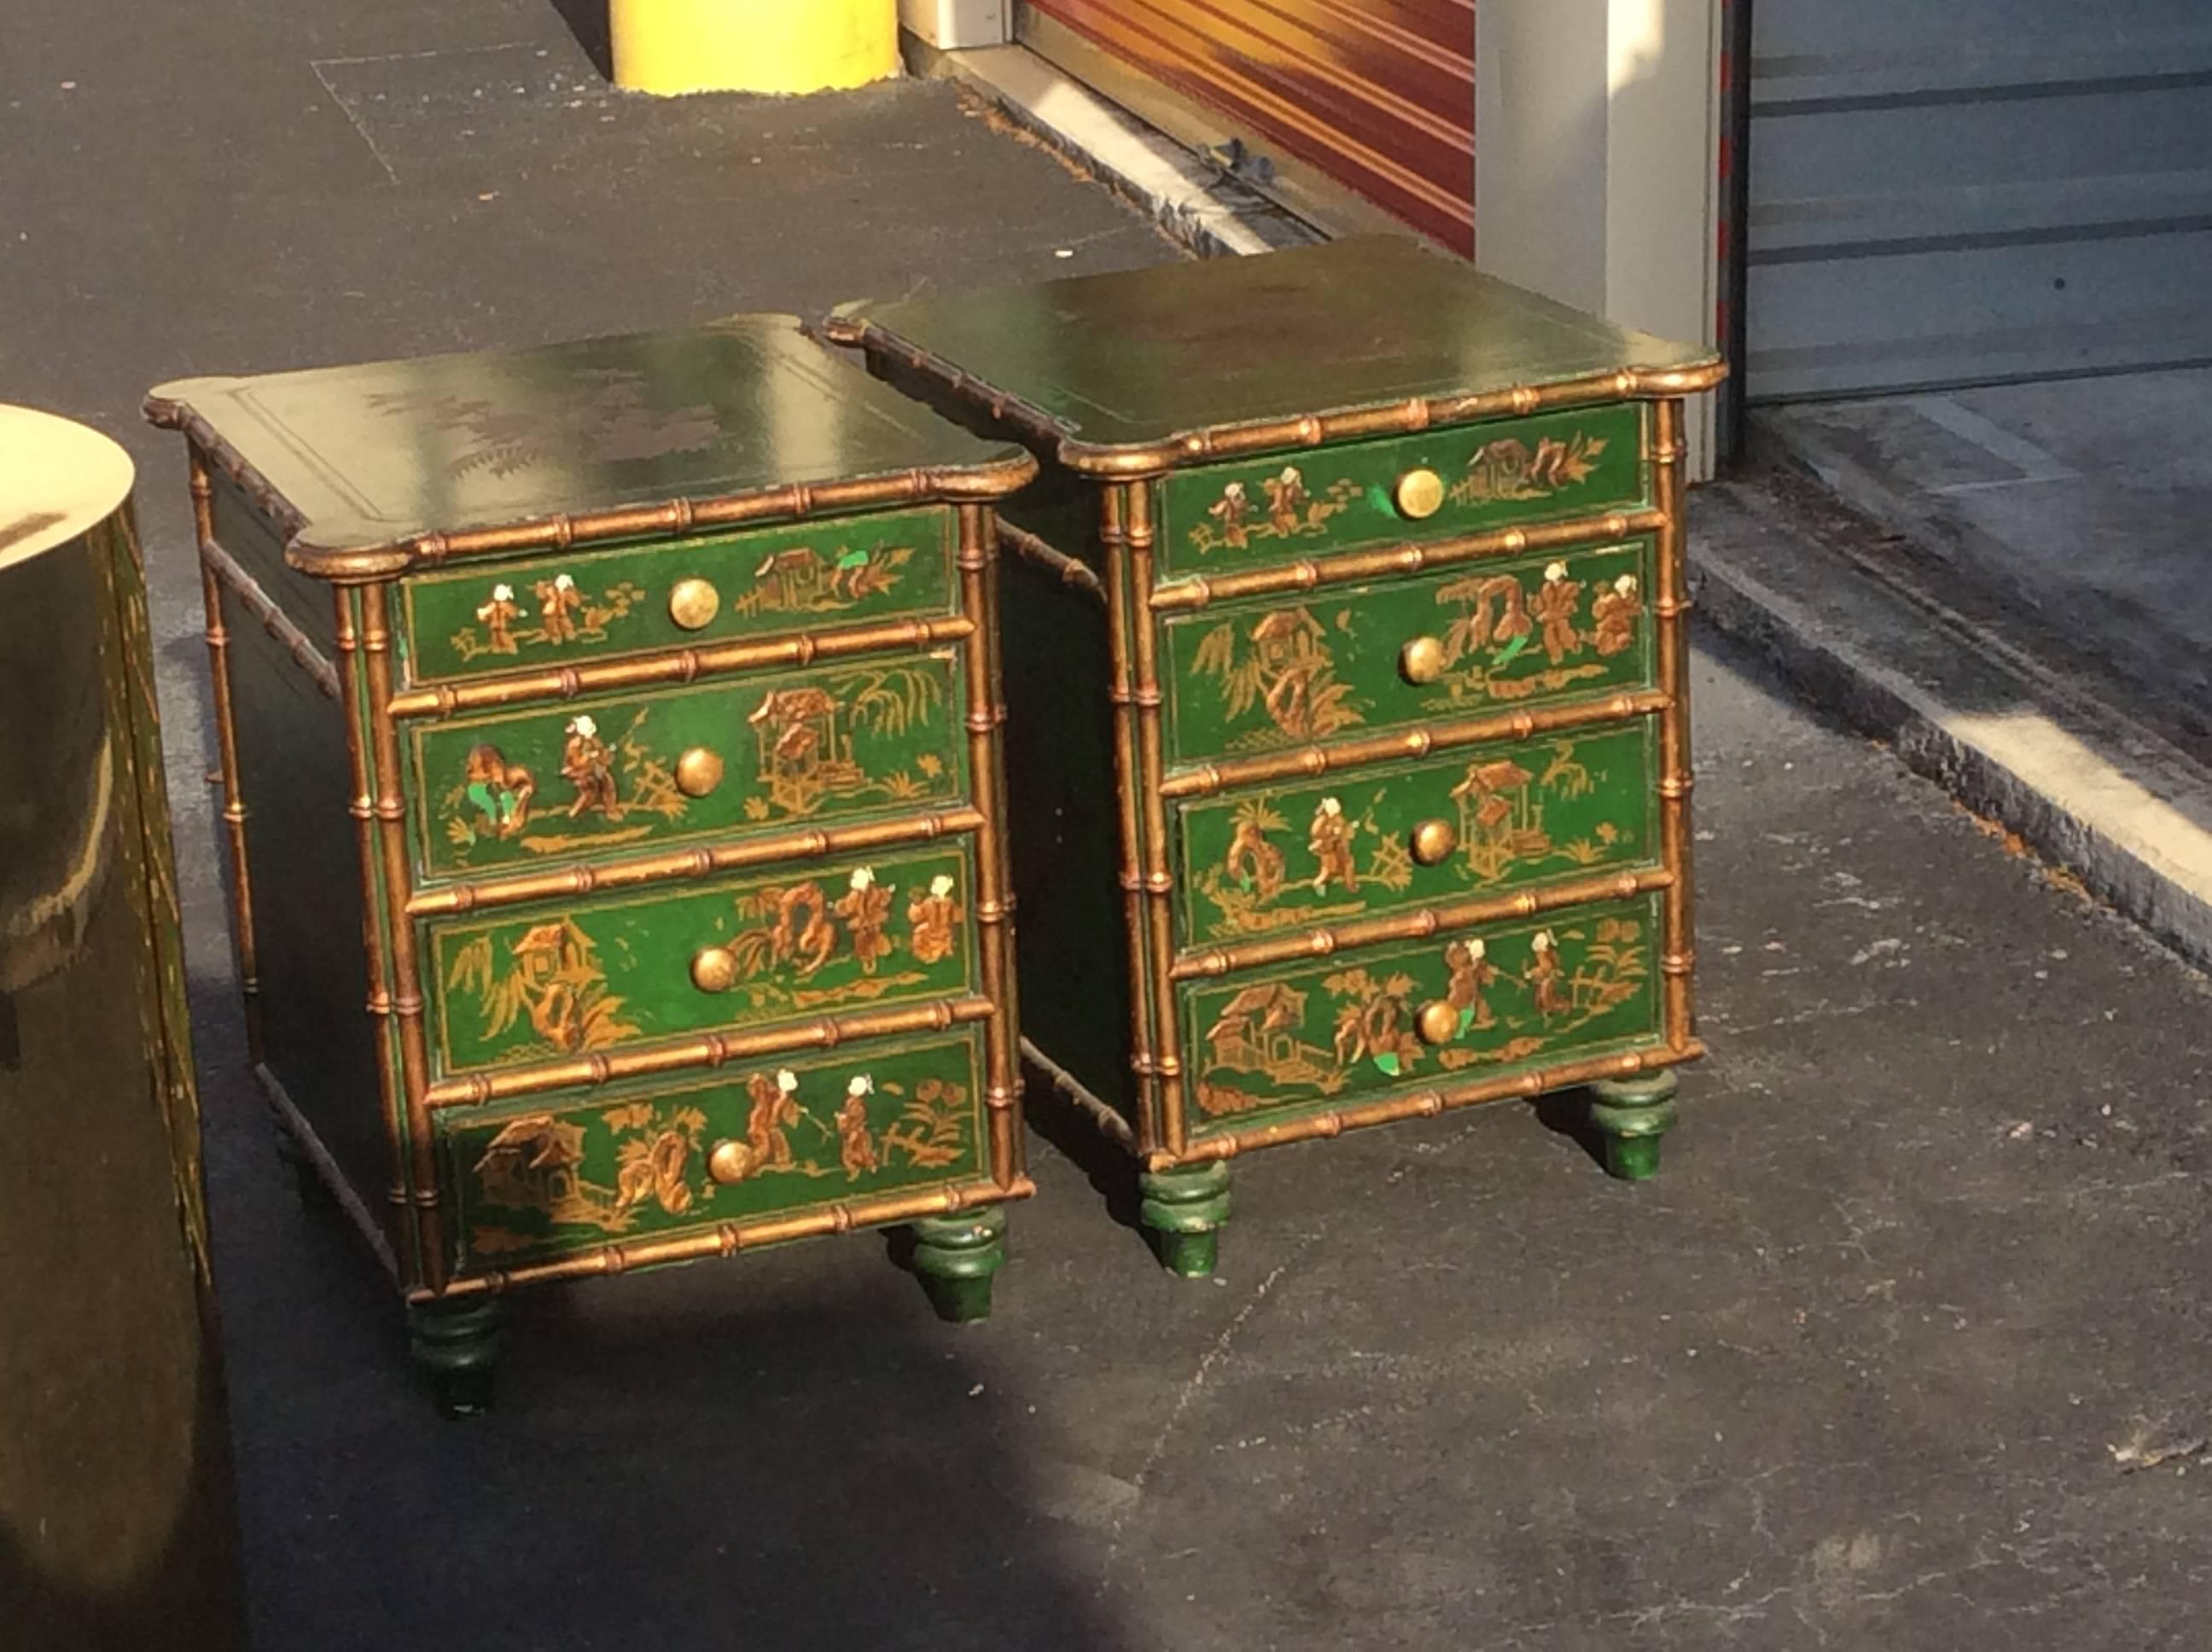 Great pair of antique Hollywood palm beach regency, end or side tables, nightsands, bed tables. Great faux bamboo, Chinese Chippendale gold trim with chinoiserie paintings. There are spots that have missing paint. The finish is original and has some